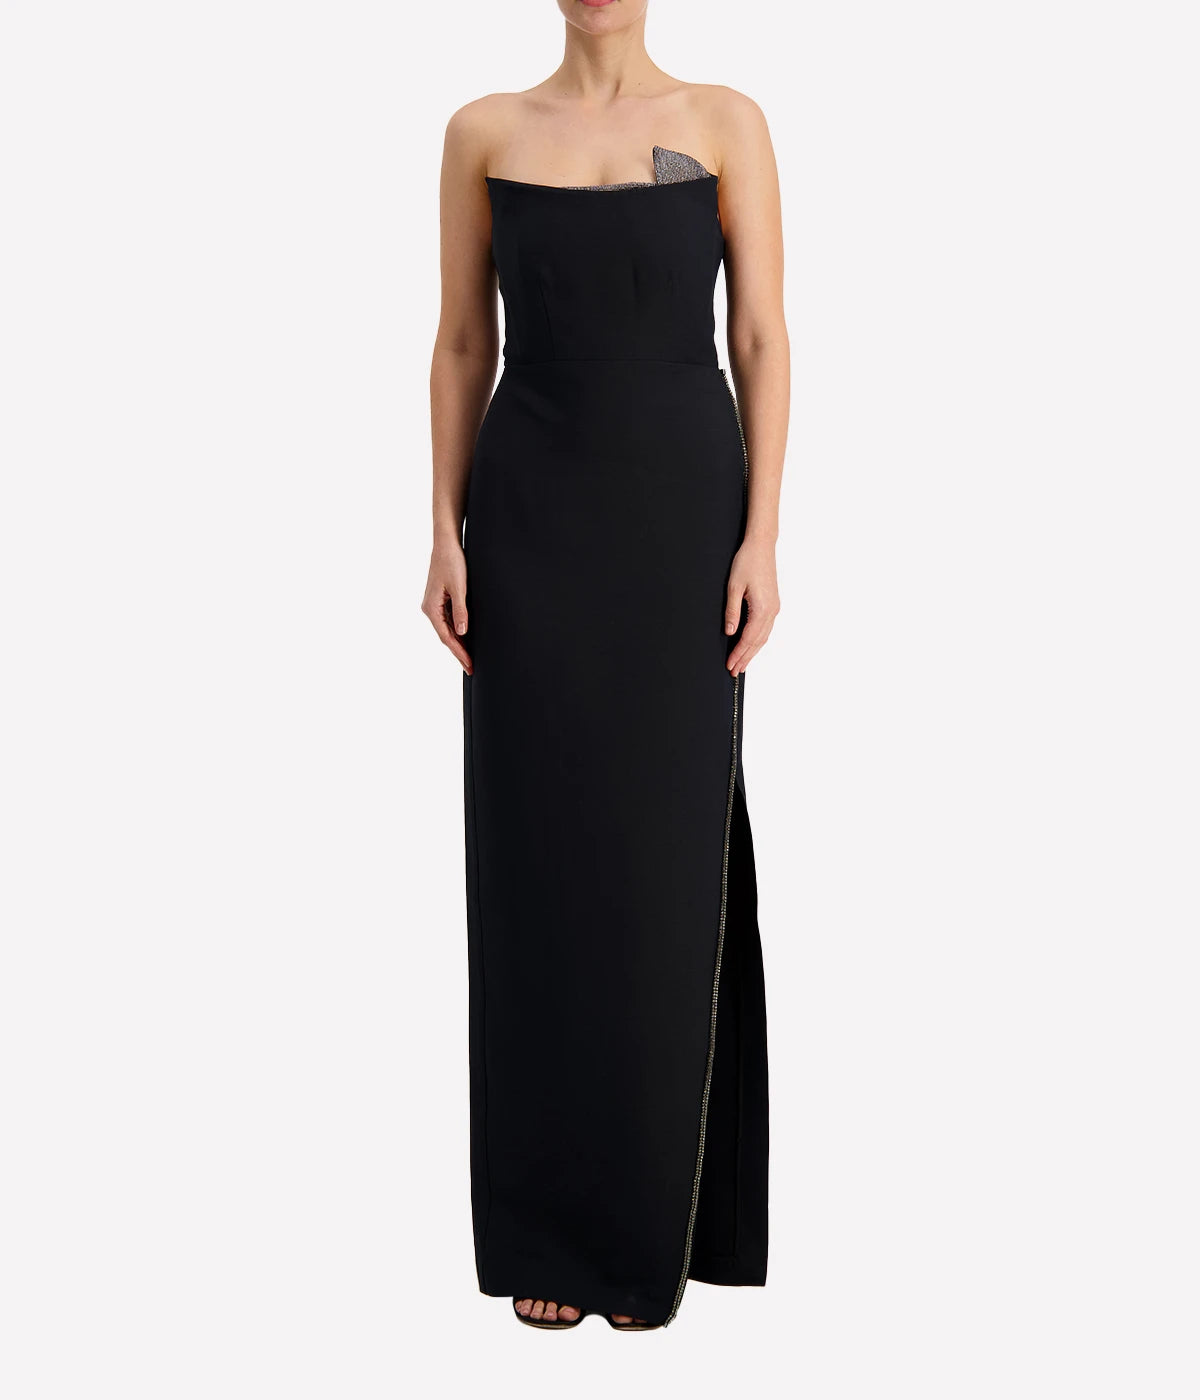 black strapless wool & silk dress with diamante embellishments by Roland Mouret. Evening and formal wear.